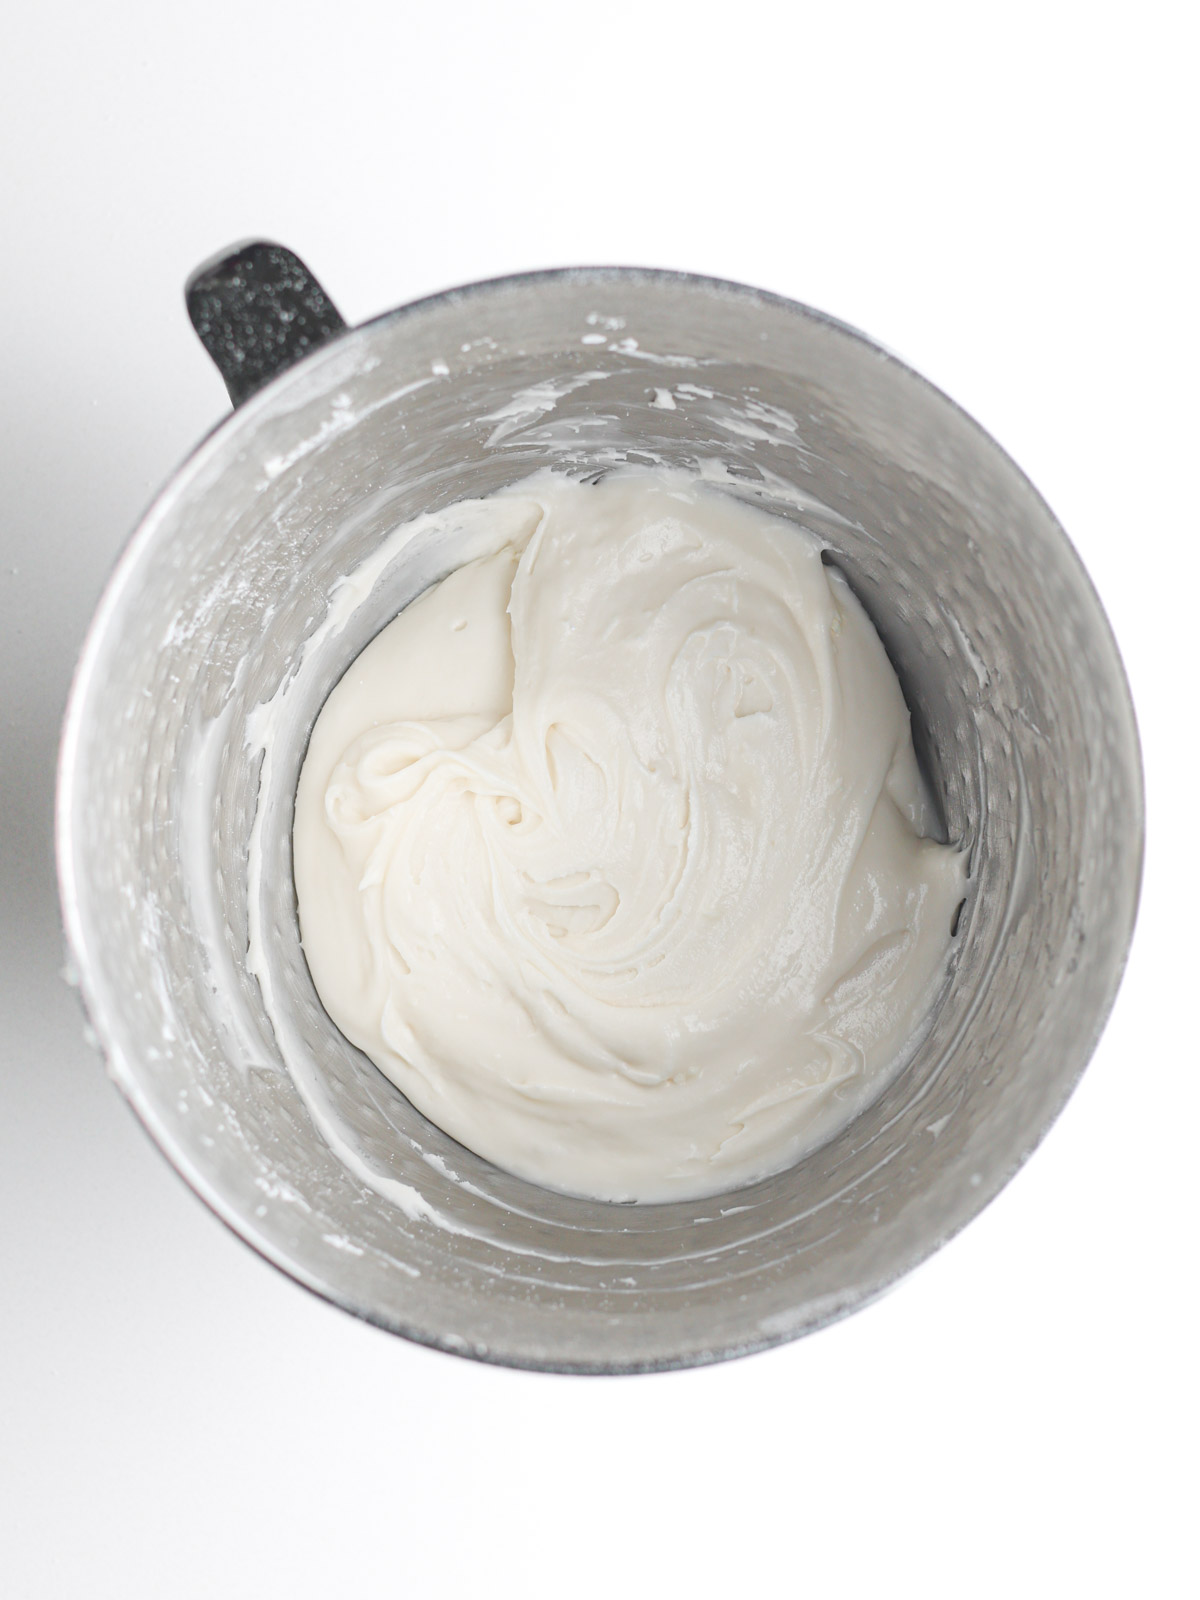 Champagne buttercream frosting in a textured silver metal mixing bowl with a handle.